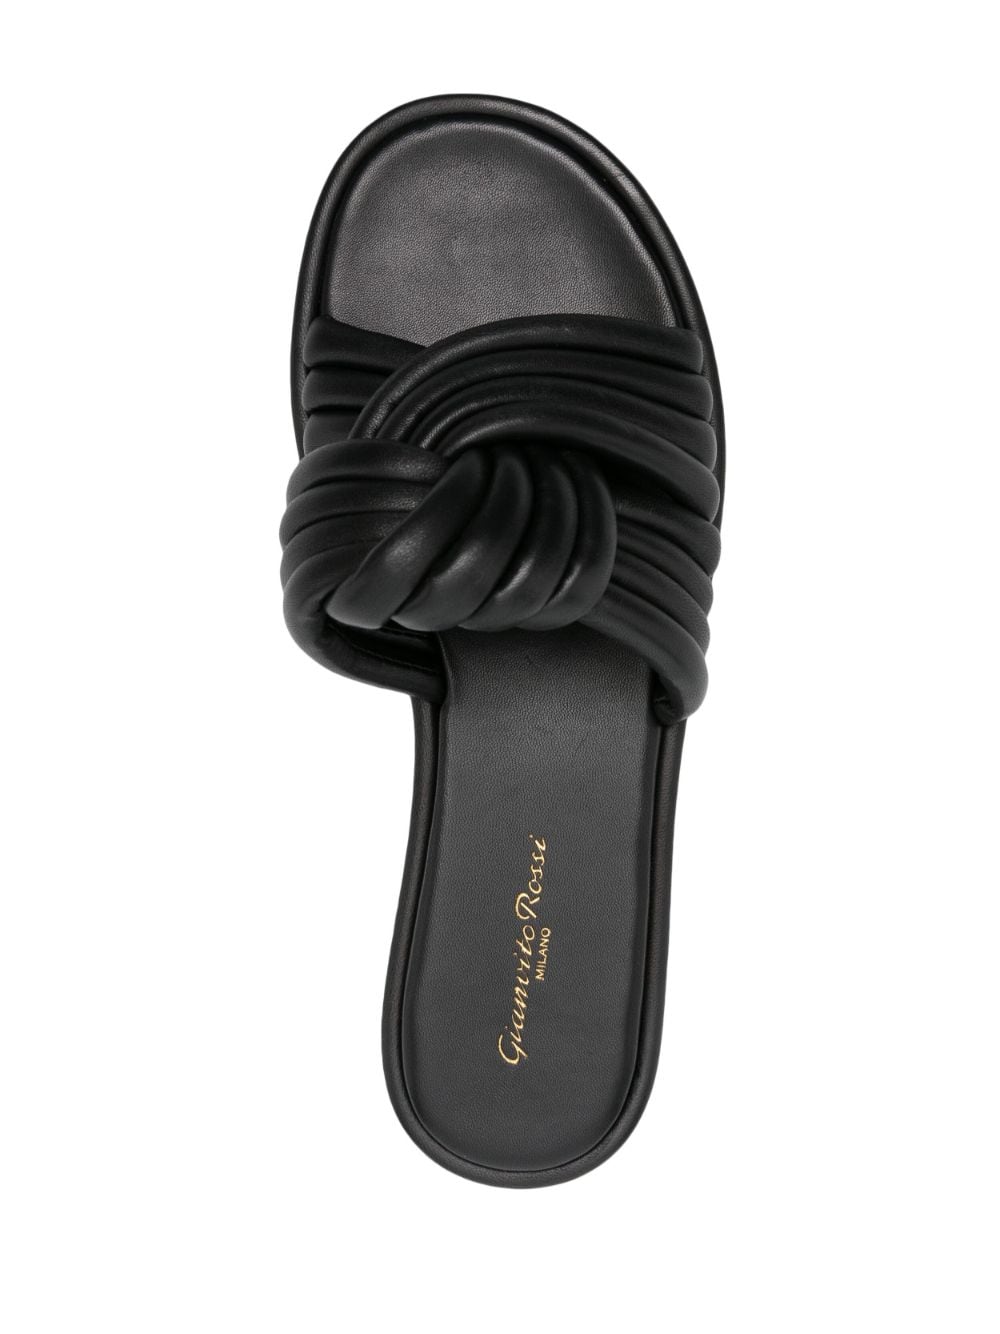 GIANVITO ROSSI Women's Leather Flat Sandals - Sleek and Stylish for SS24